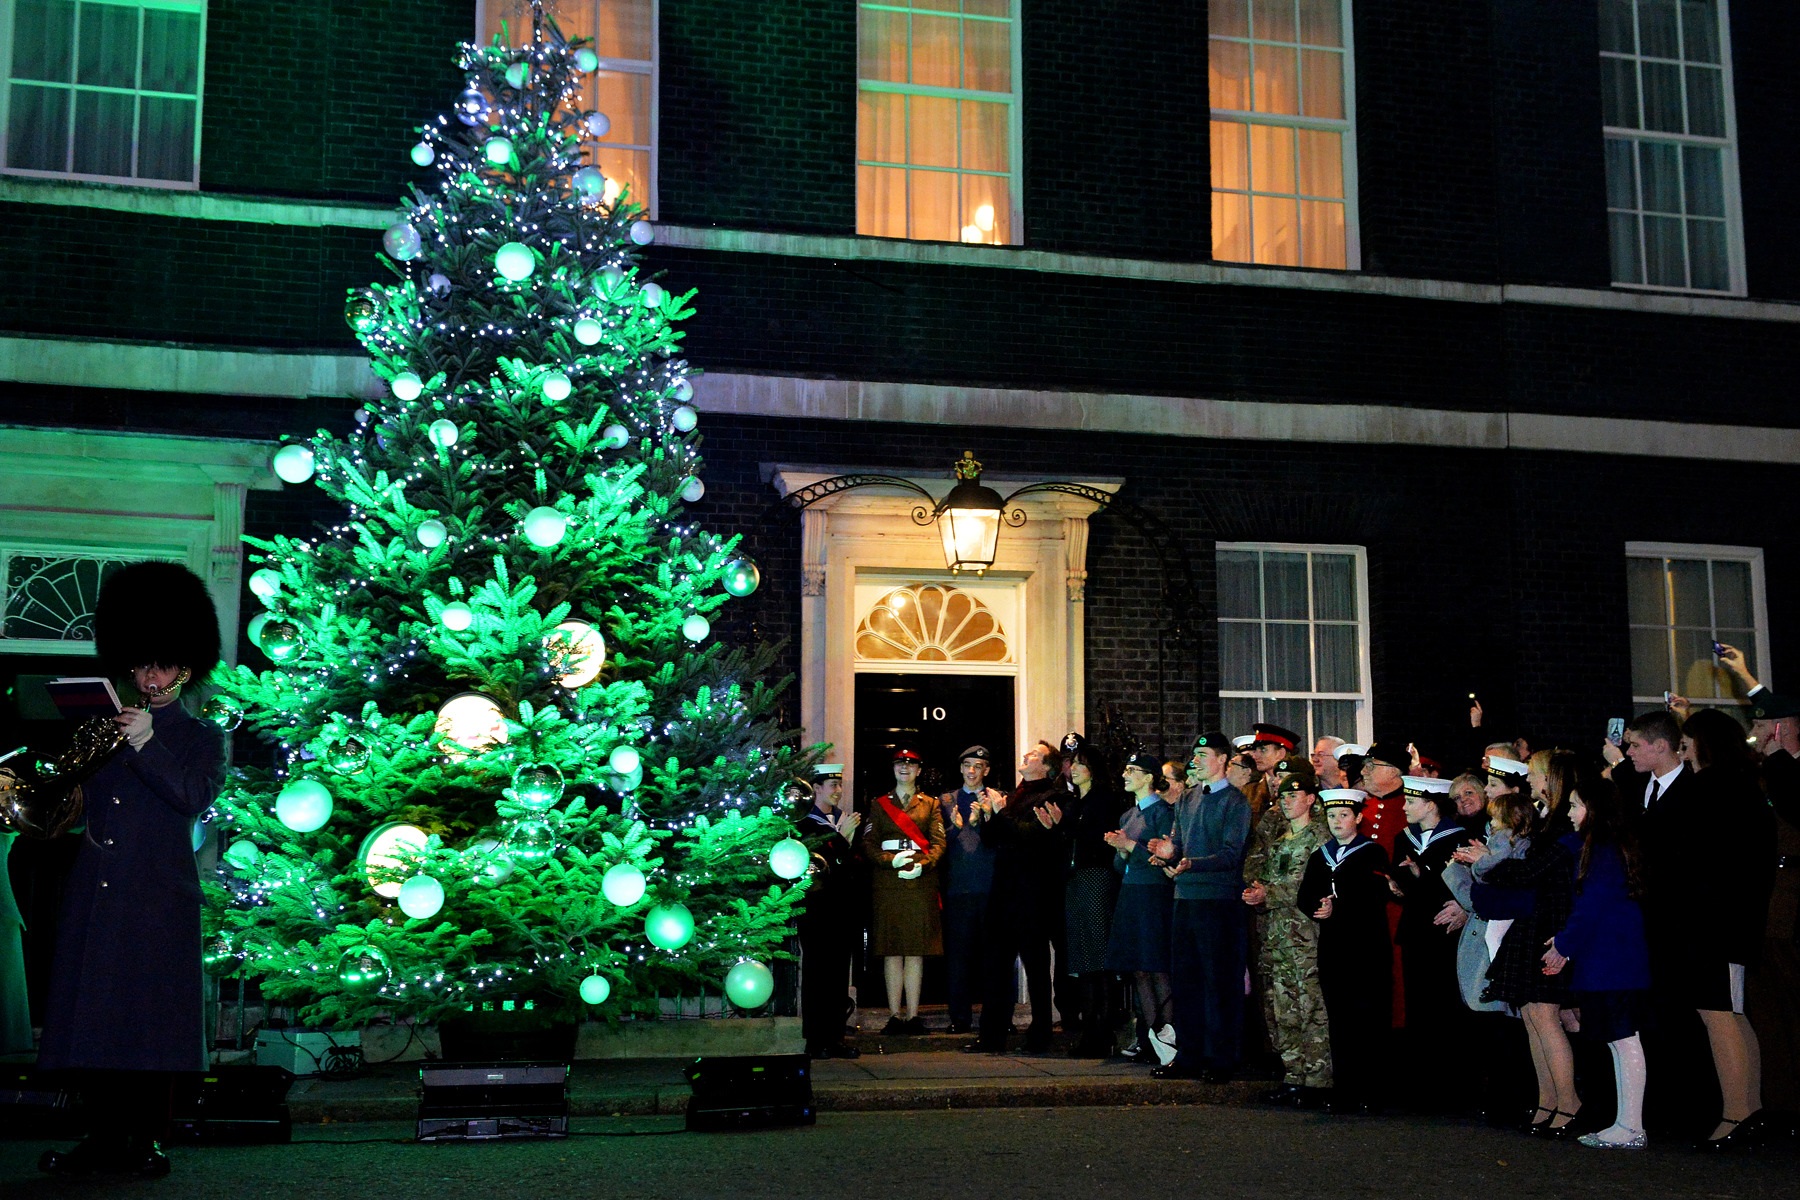 Downing Street and Diamond prepare for the International Year of Light